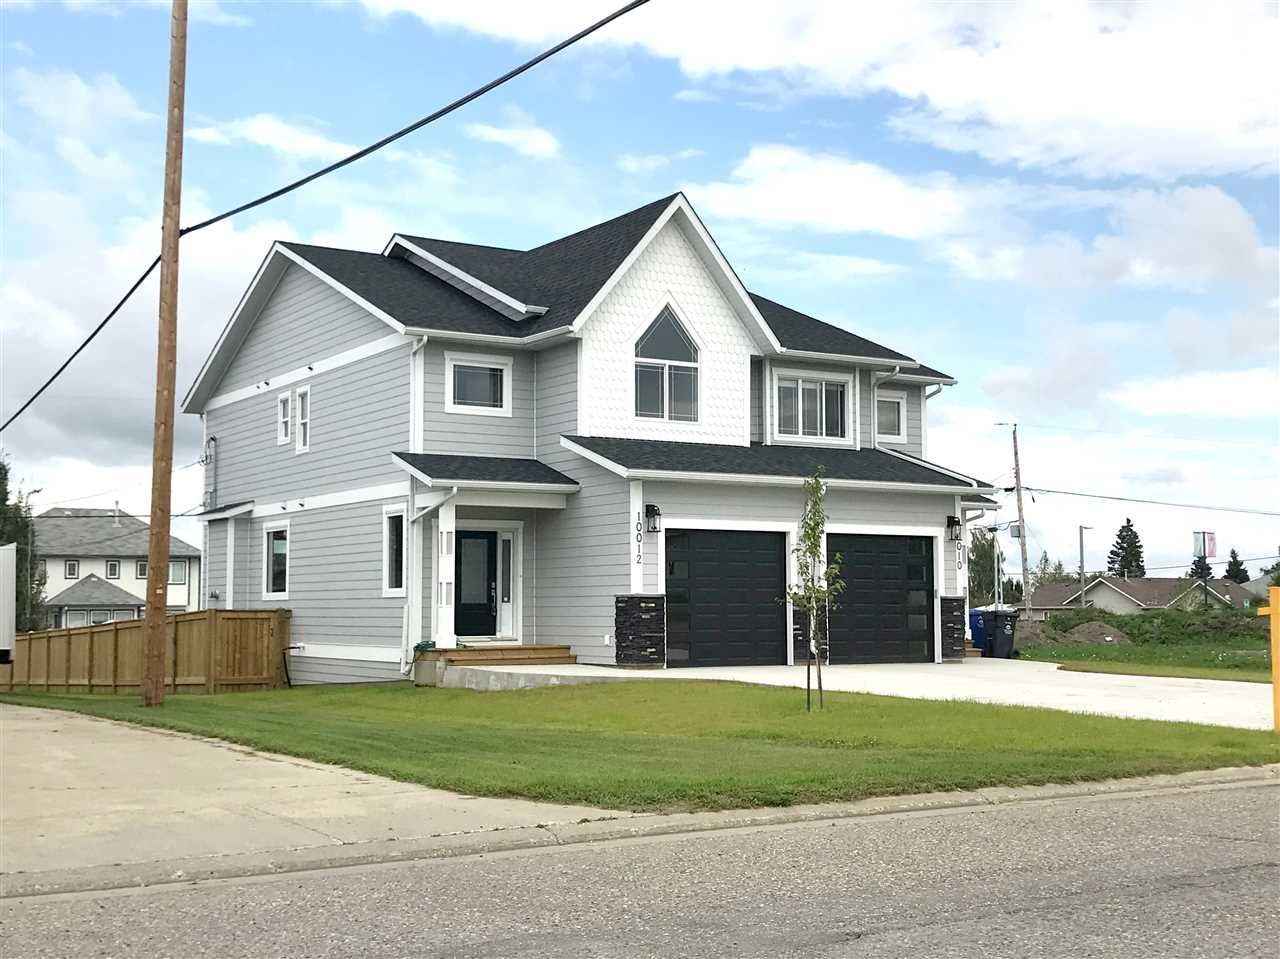 Main Photo: 10012 111 AVENUE in : Fort St. John - City NW 1/2 Duplex for sale : MLS®# R2244375